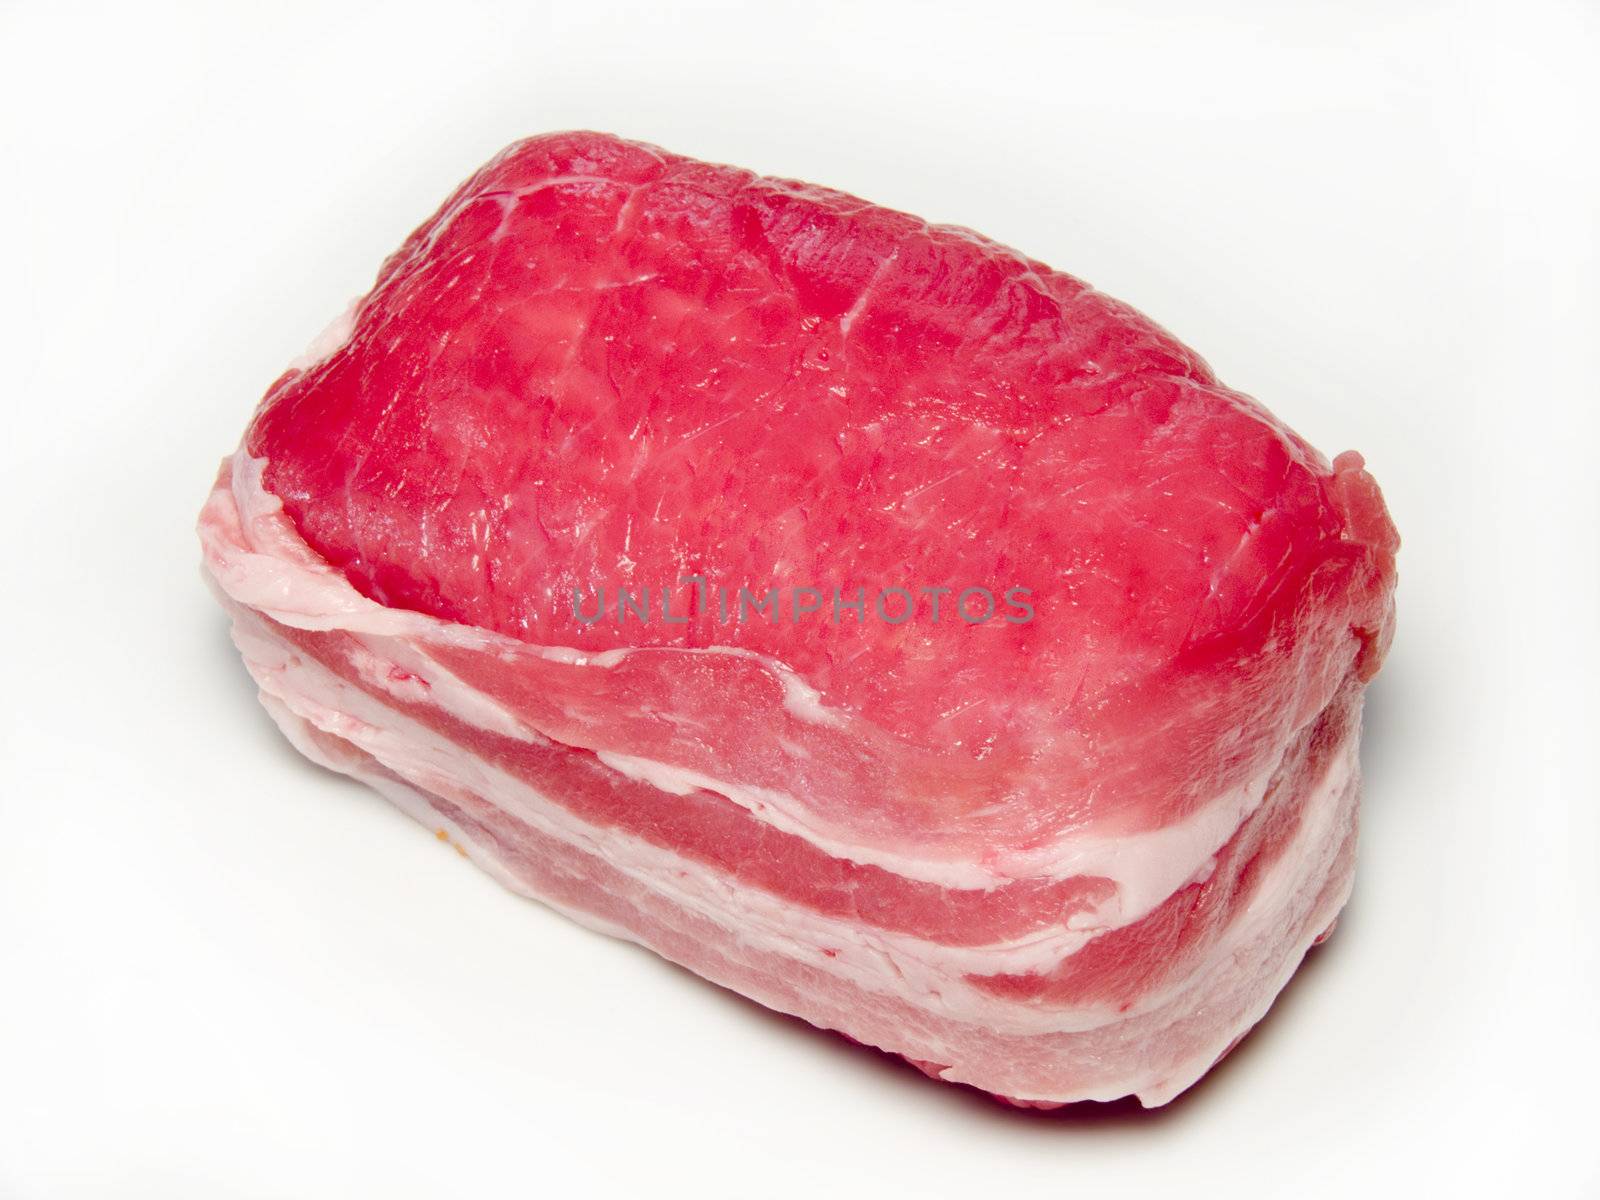 Piece of red meat on a white background